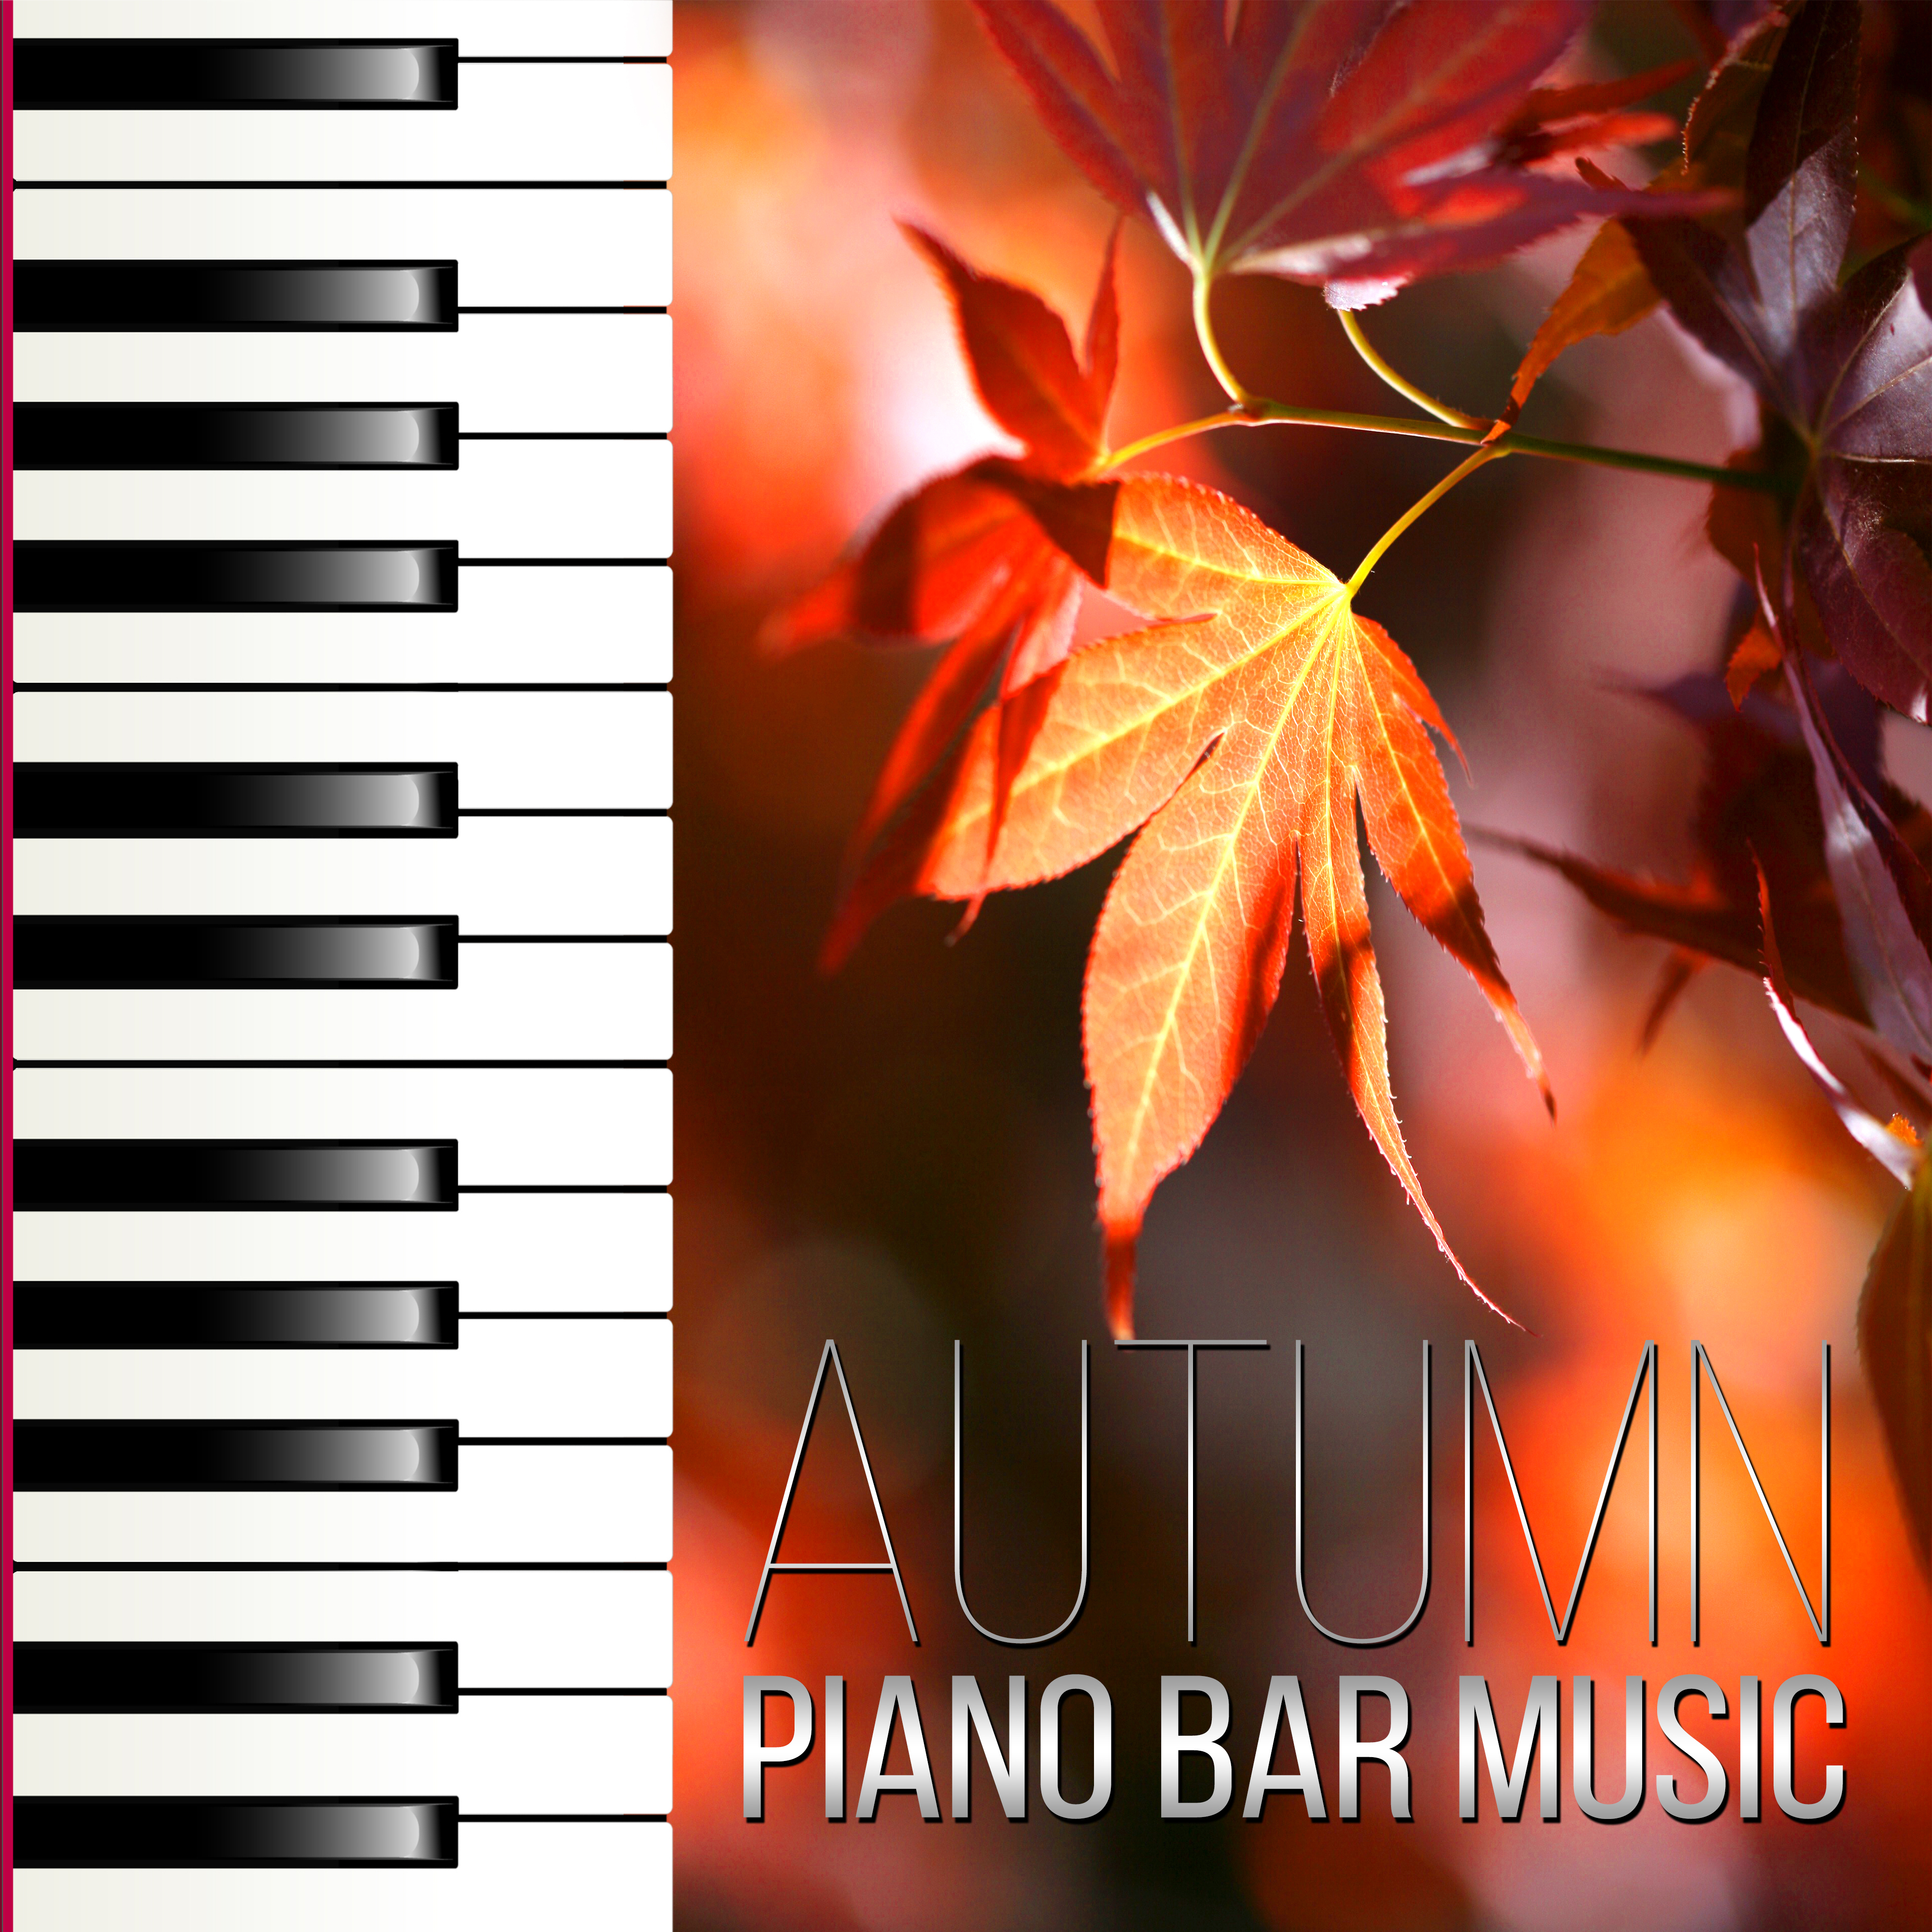 Autumn Piano Bar Music – Emotional Piano Bar Music Collection, Liquid and Sensual Music, Relaxing Piano Songs for Dinner Party